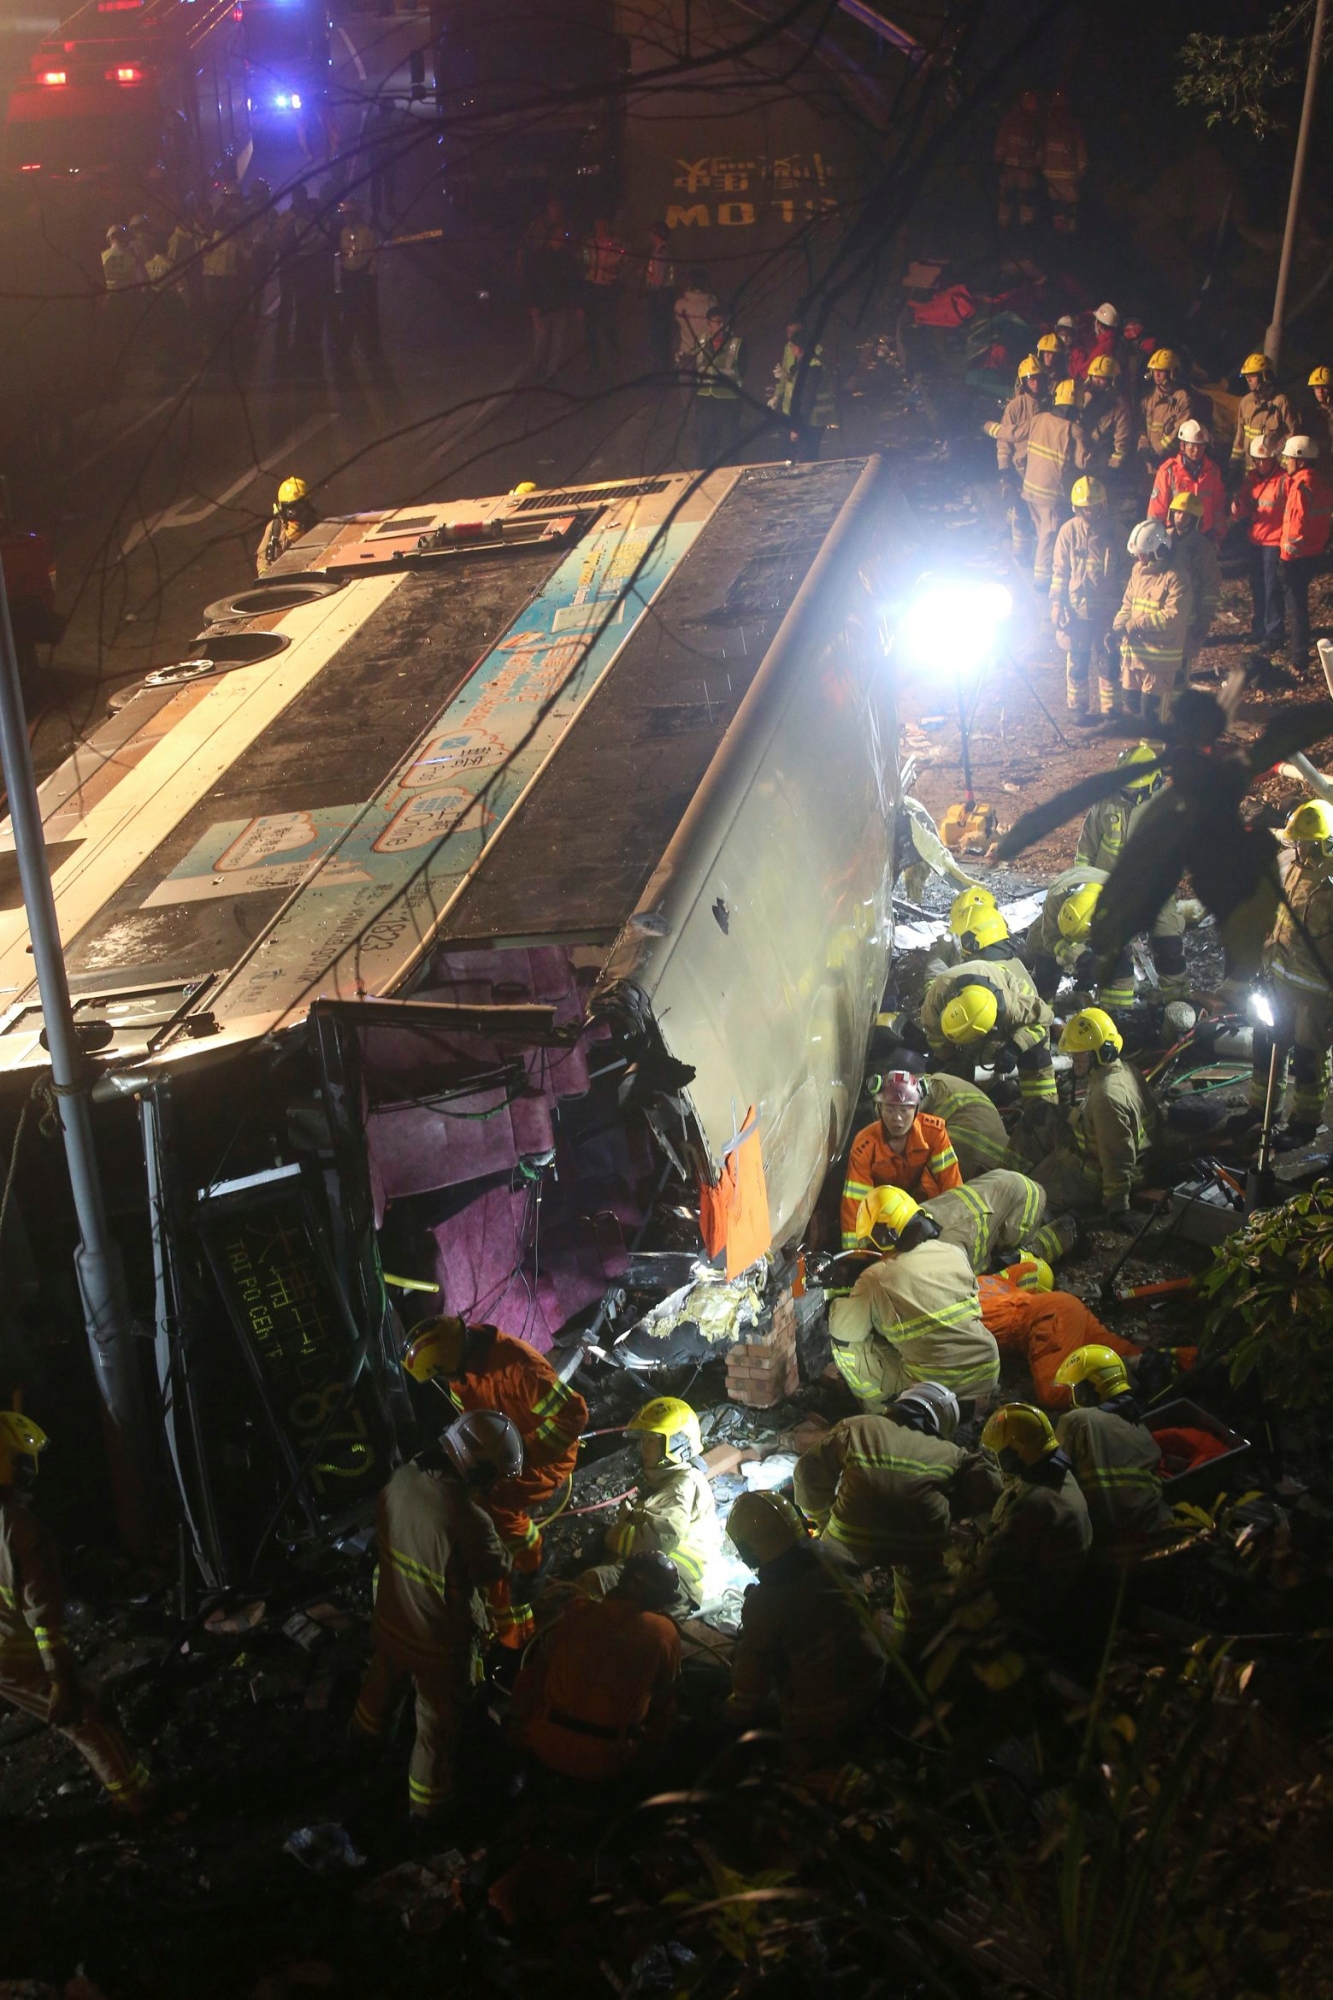 In this Feb. 10, 2018 photo, emergency workers prepare to rescue injured passengers from a double-decker lying on its side in Hong Kong. A double-decker bus lost control and crashed in a Hong Kong suburb on Saturday evening, killing a number of people and injuring dozens more, authorities in the southern Chinese city said. (AP Photo) Hong Kong Bus Crash